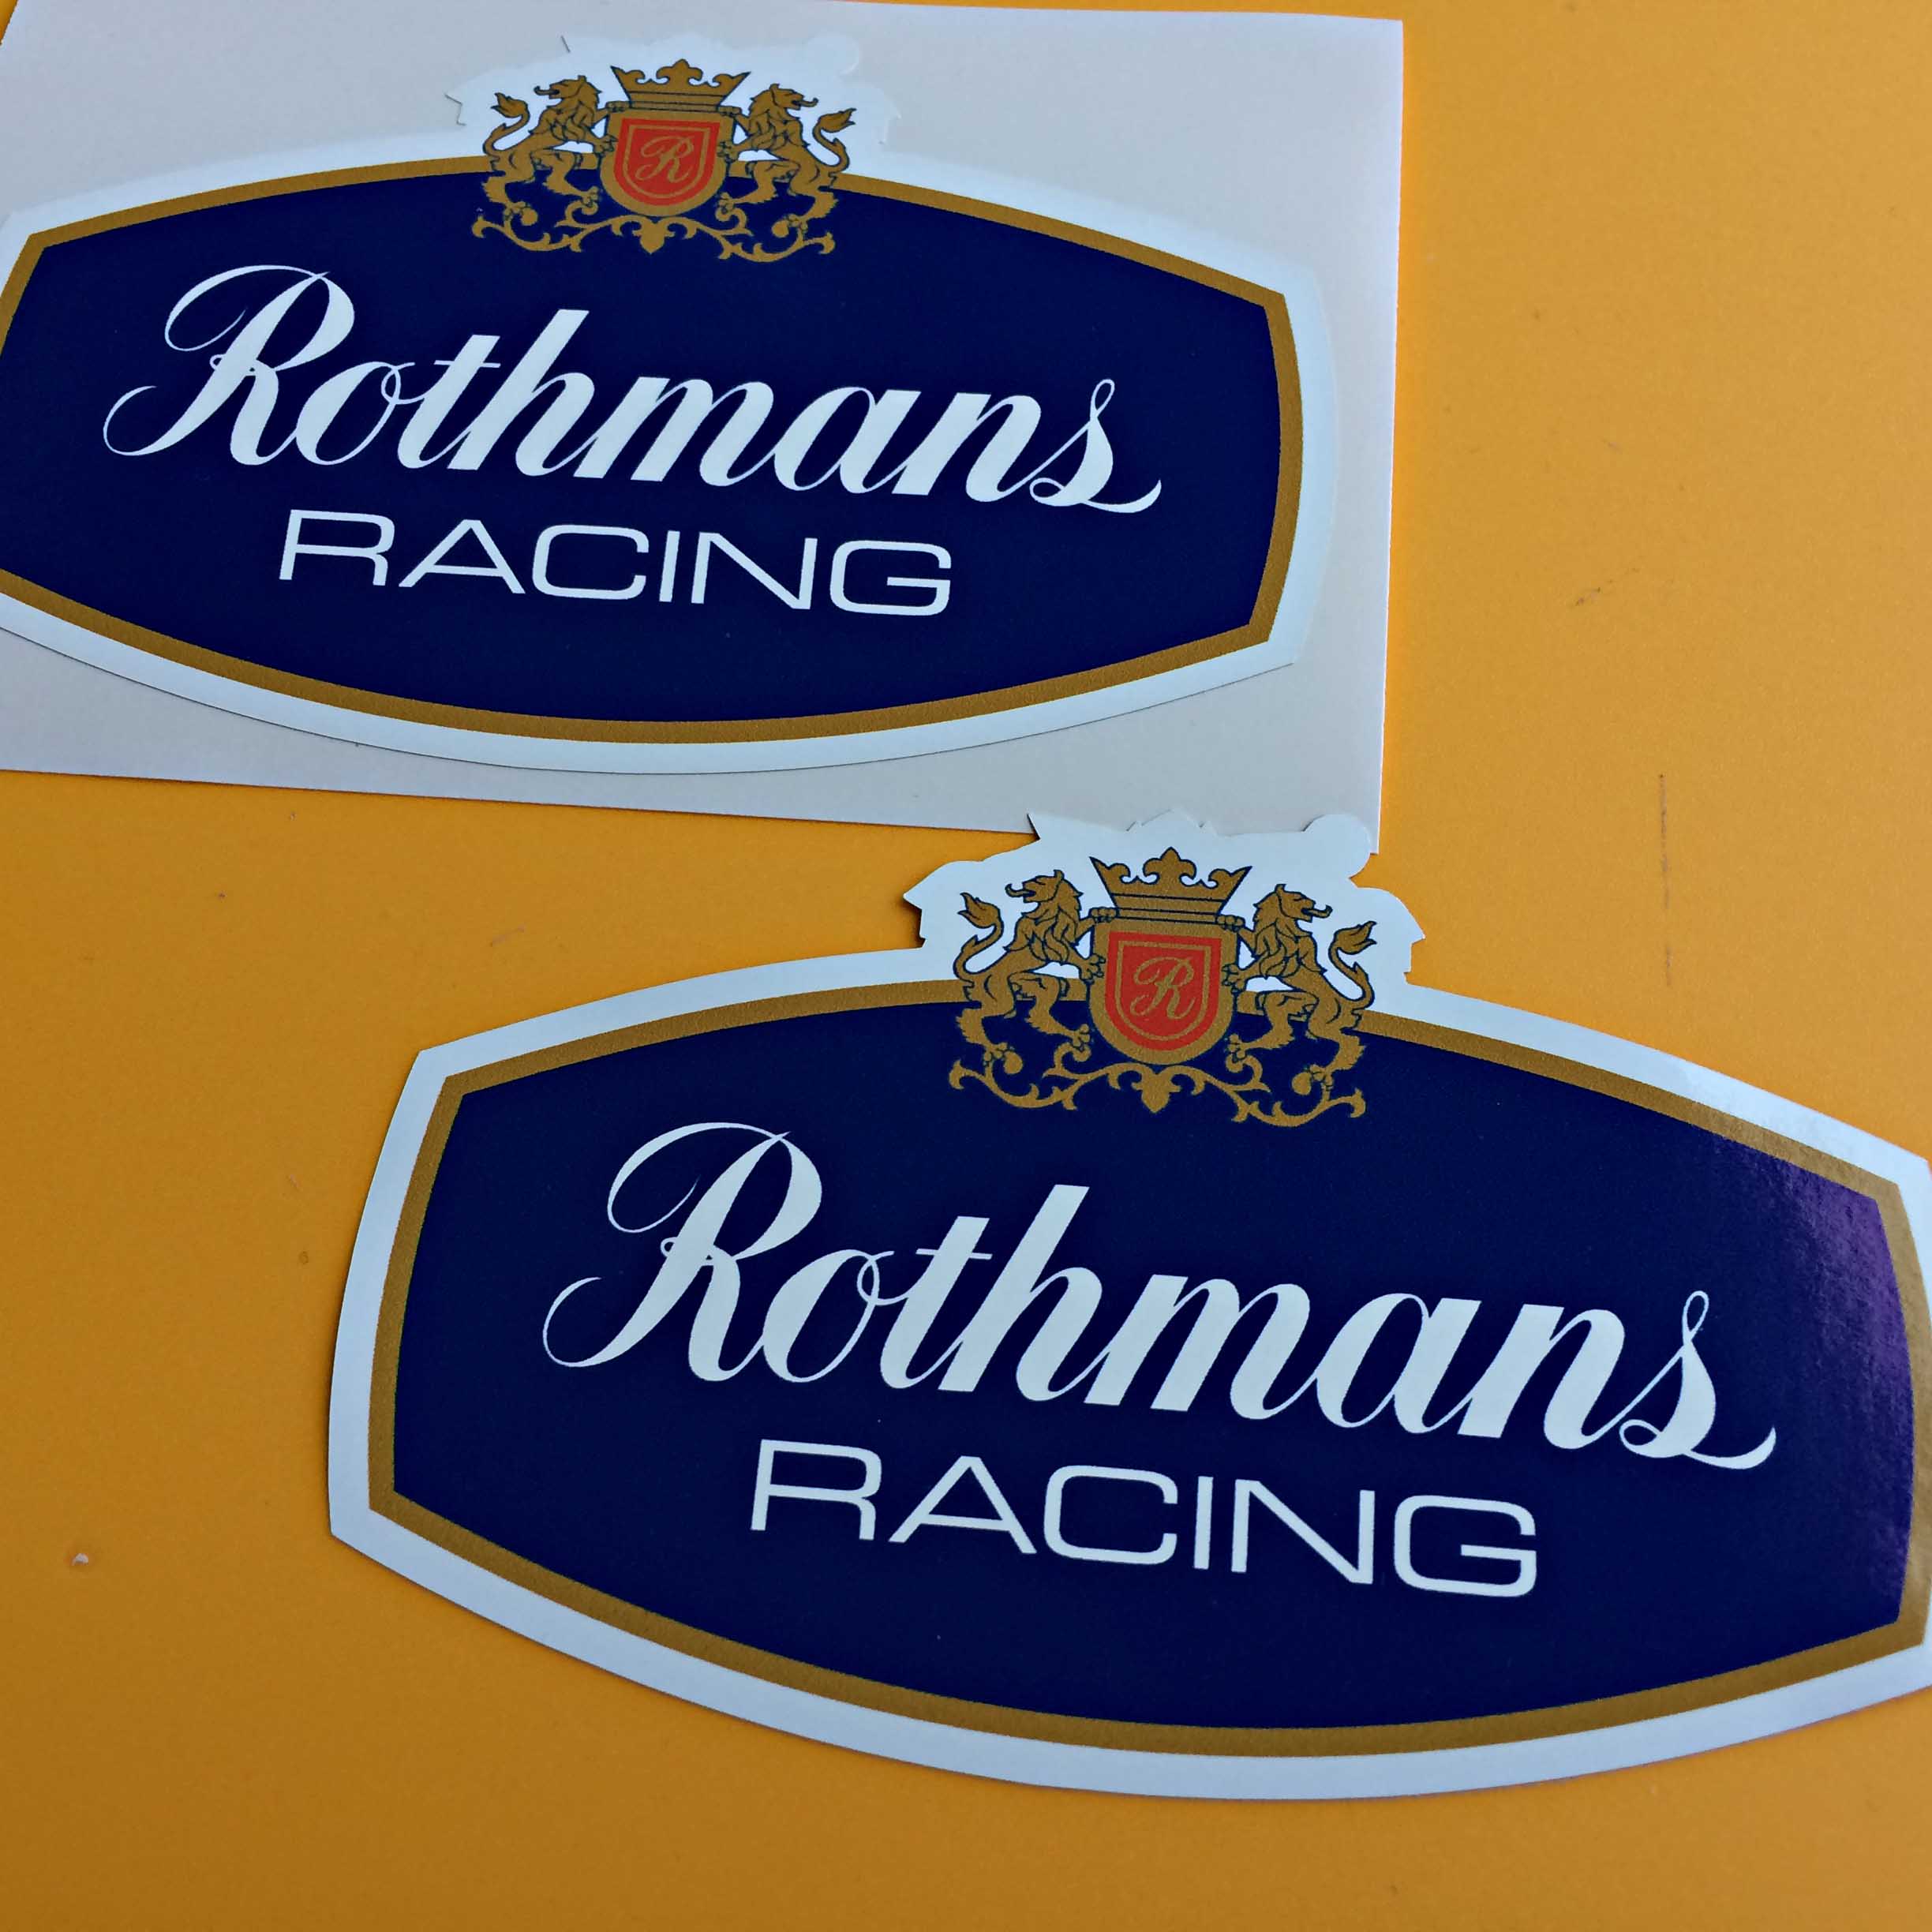 ROTHMANS RACING STICKERS. Rothmans Racing in white lettering on a blue background. Above are two golden lions either side of a gold crown and shield. The shield has a gold letter R on a red background.